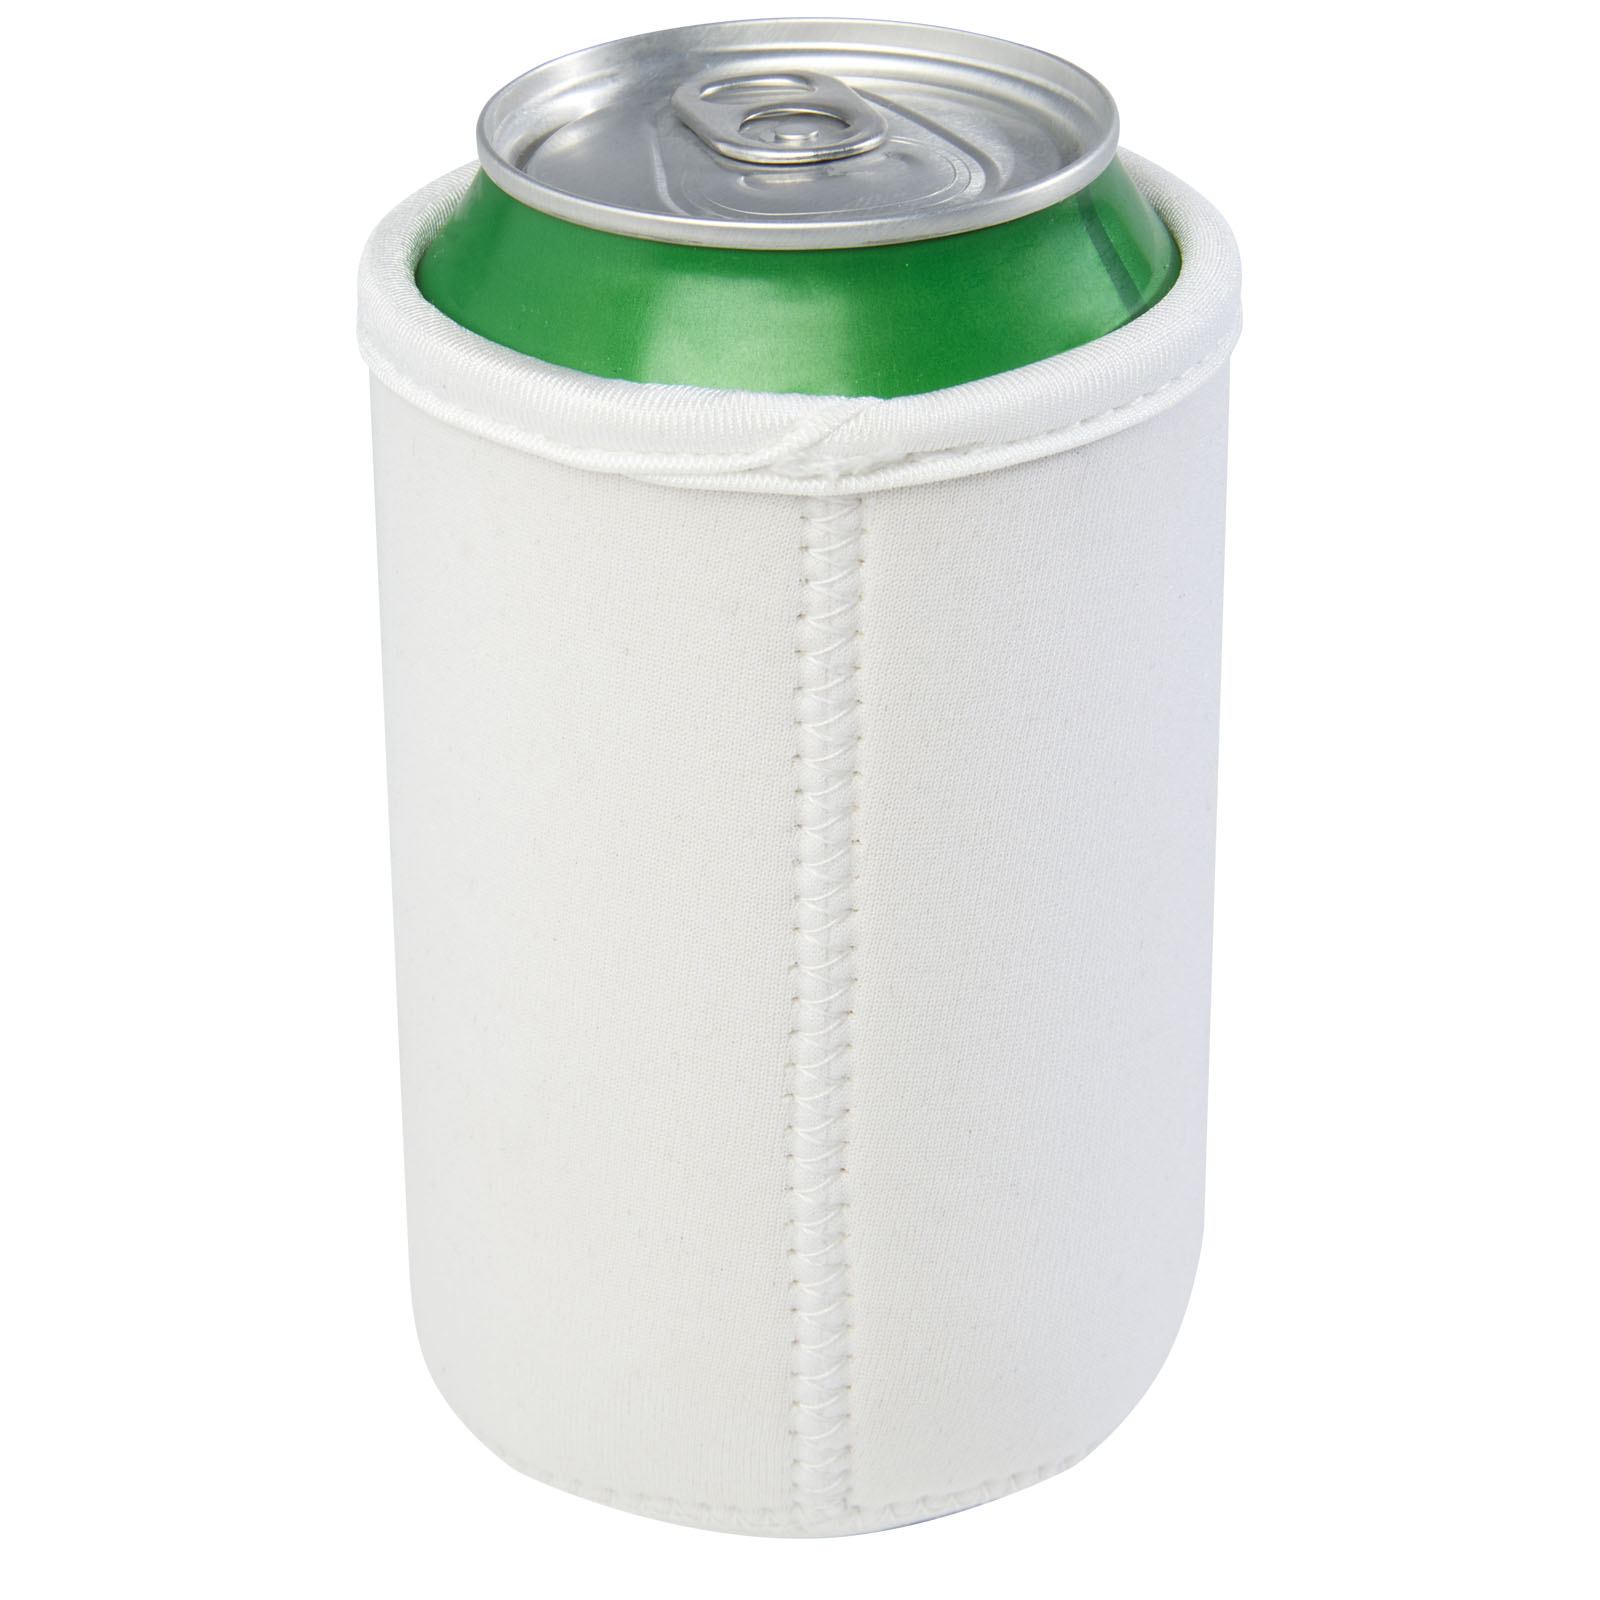 Advertising Cooler bags - Vrie recycled neoprene can sleeve holder - 4